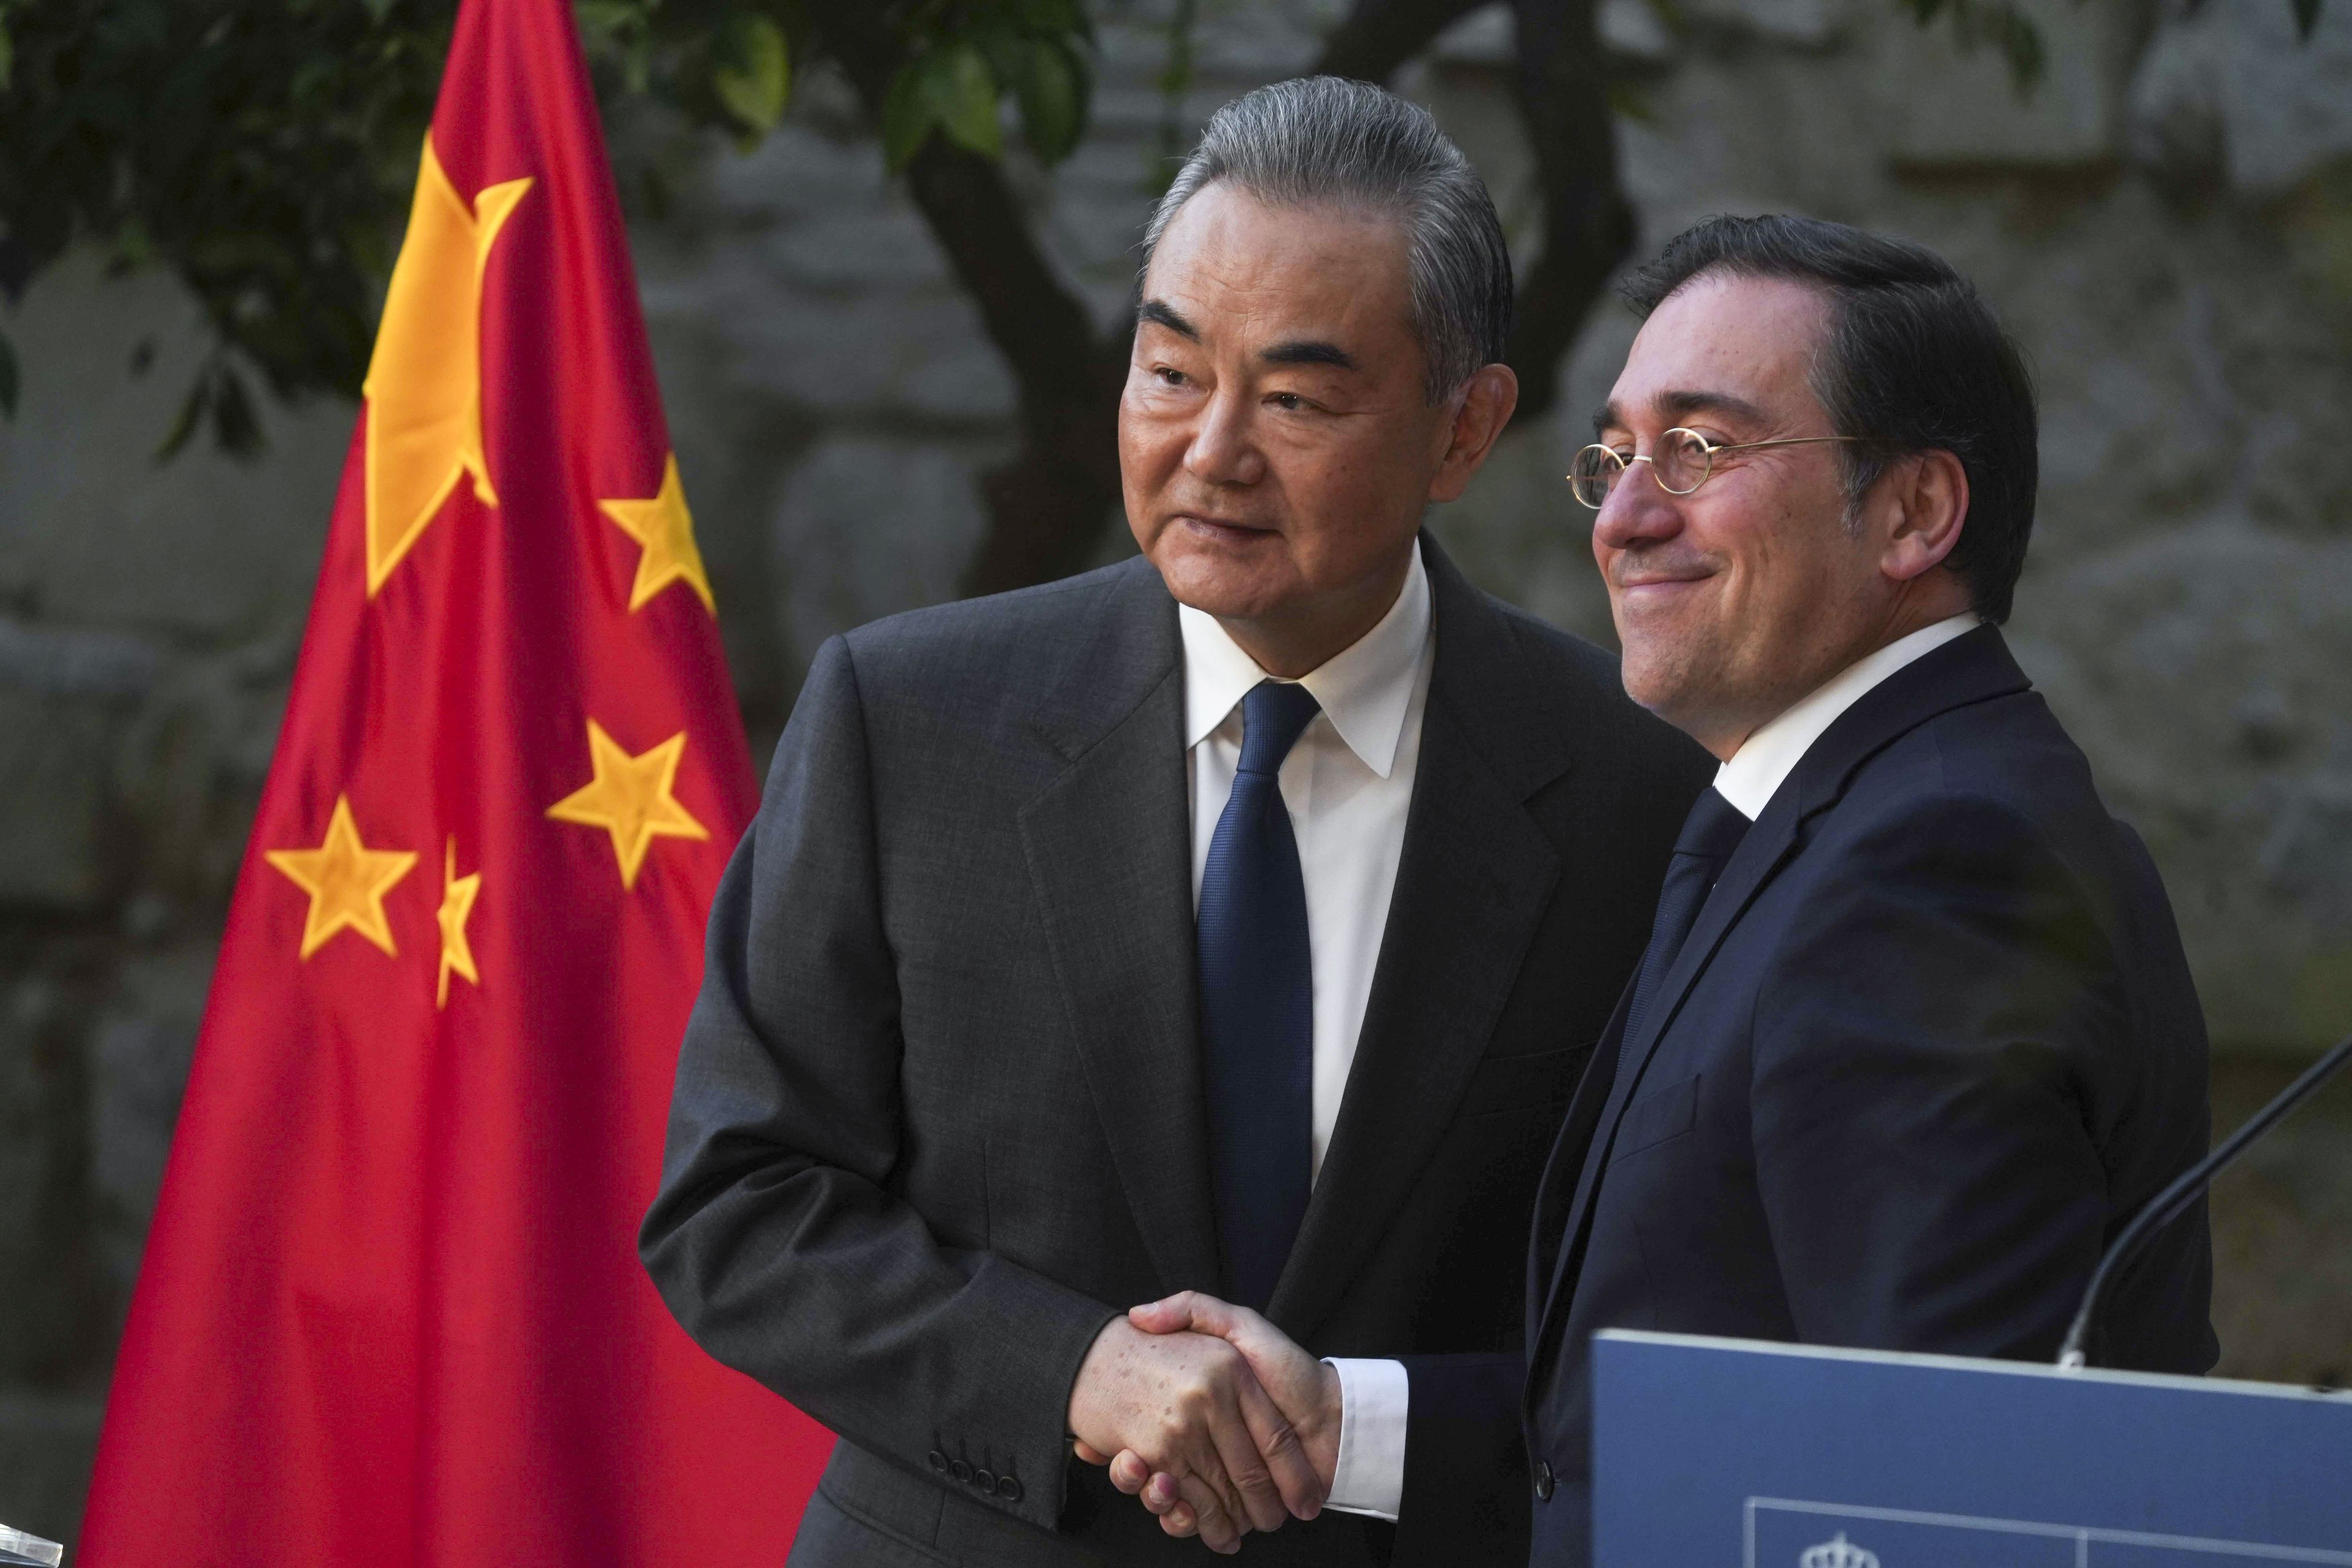 Chinese Foreign Minister Wang Yi and his Spanish counterpart Jose Manuel Albares speak to reporters after talks in Cordoba, Spain on Sunday. Photo: EPA-EFE